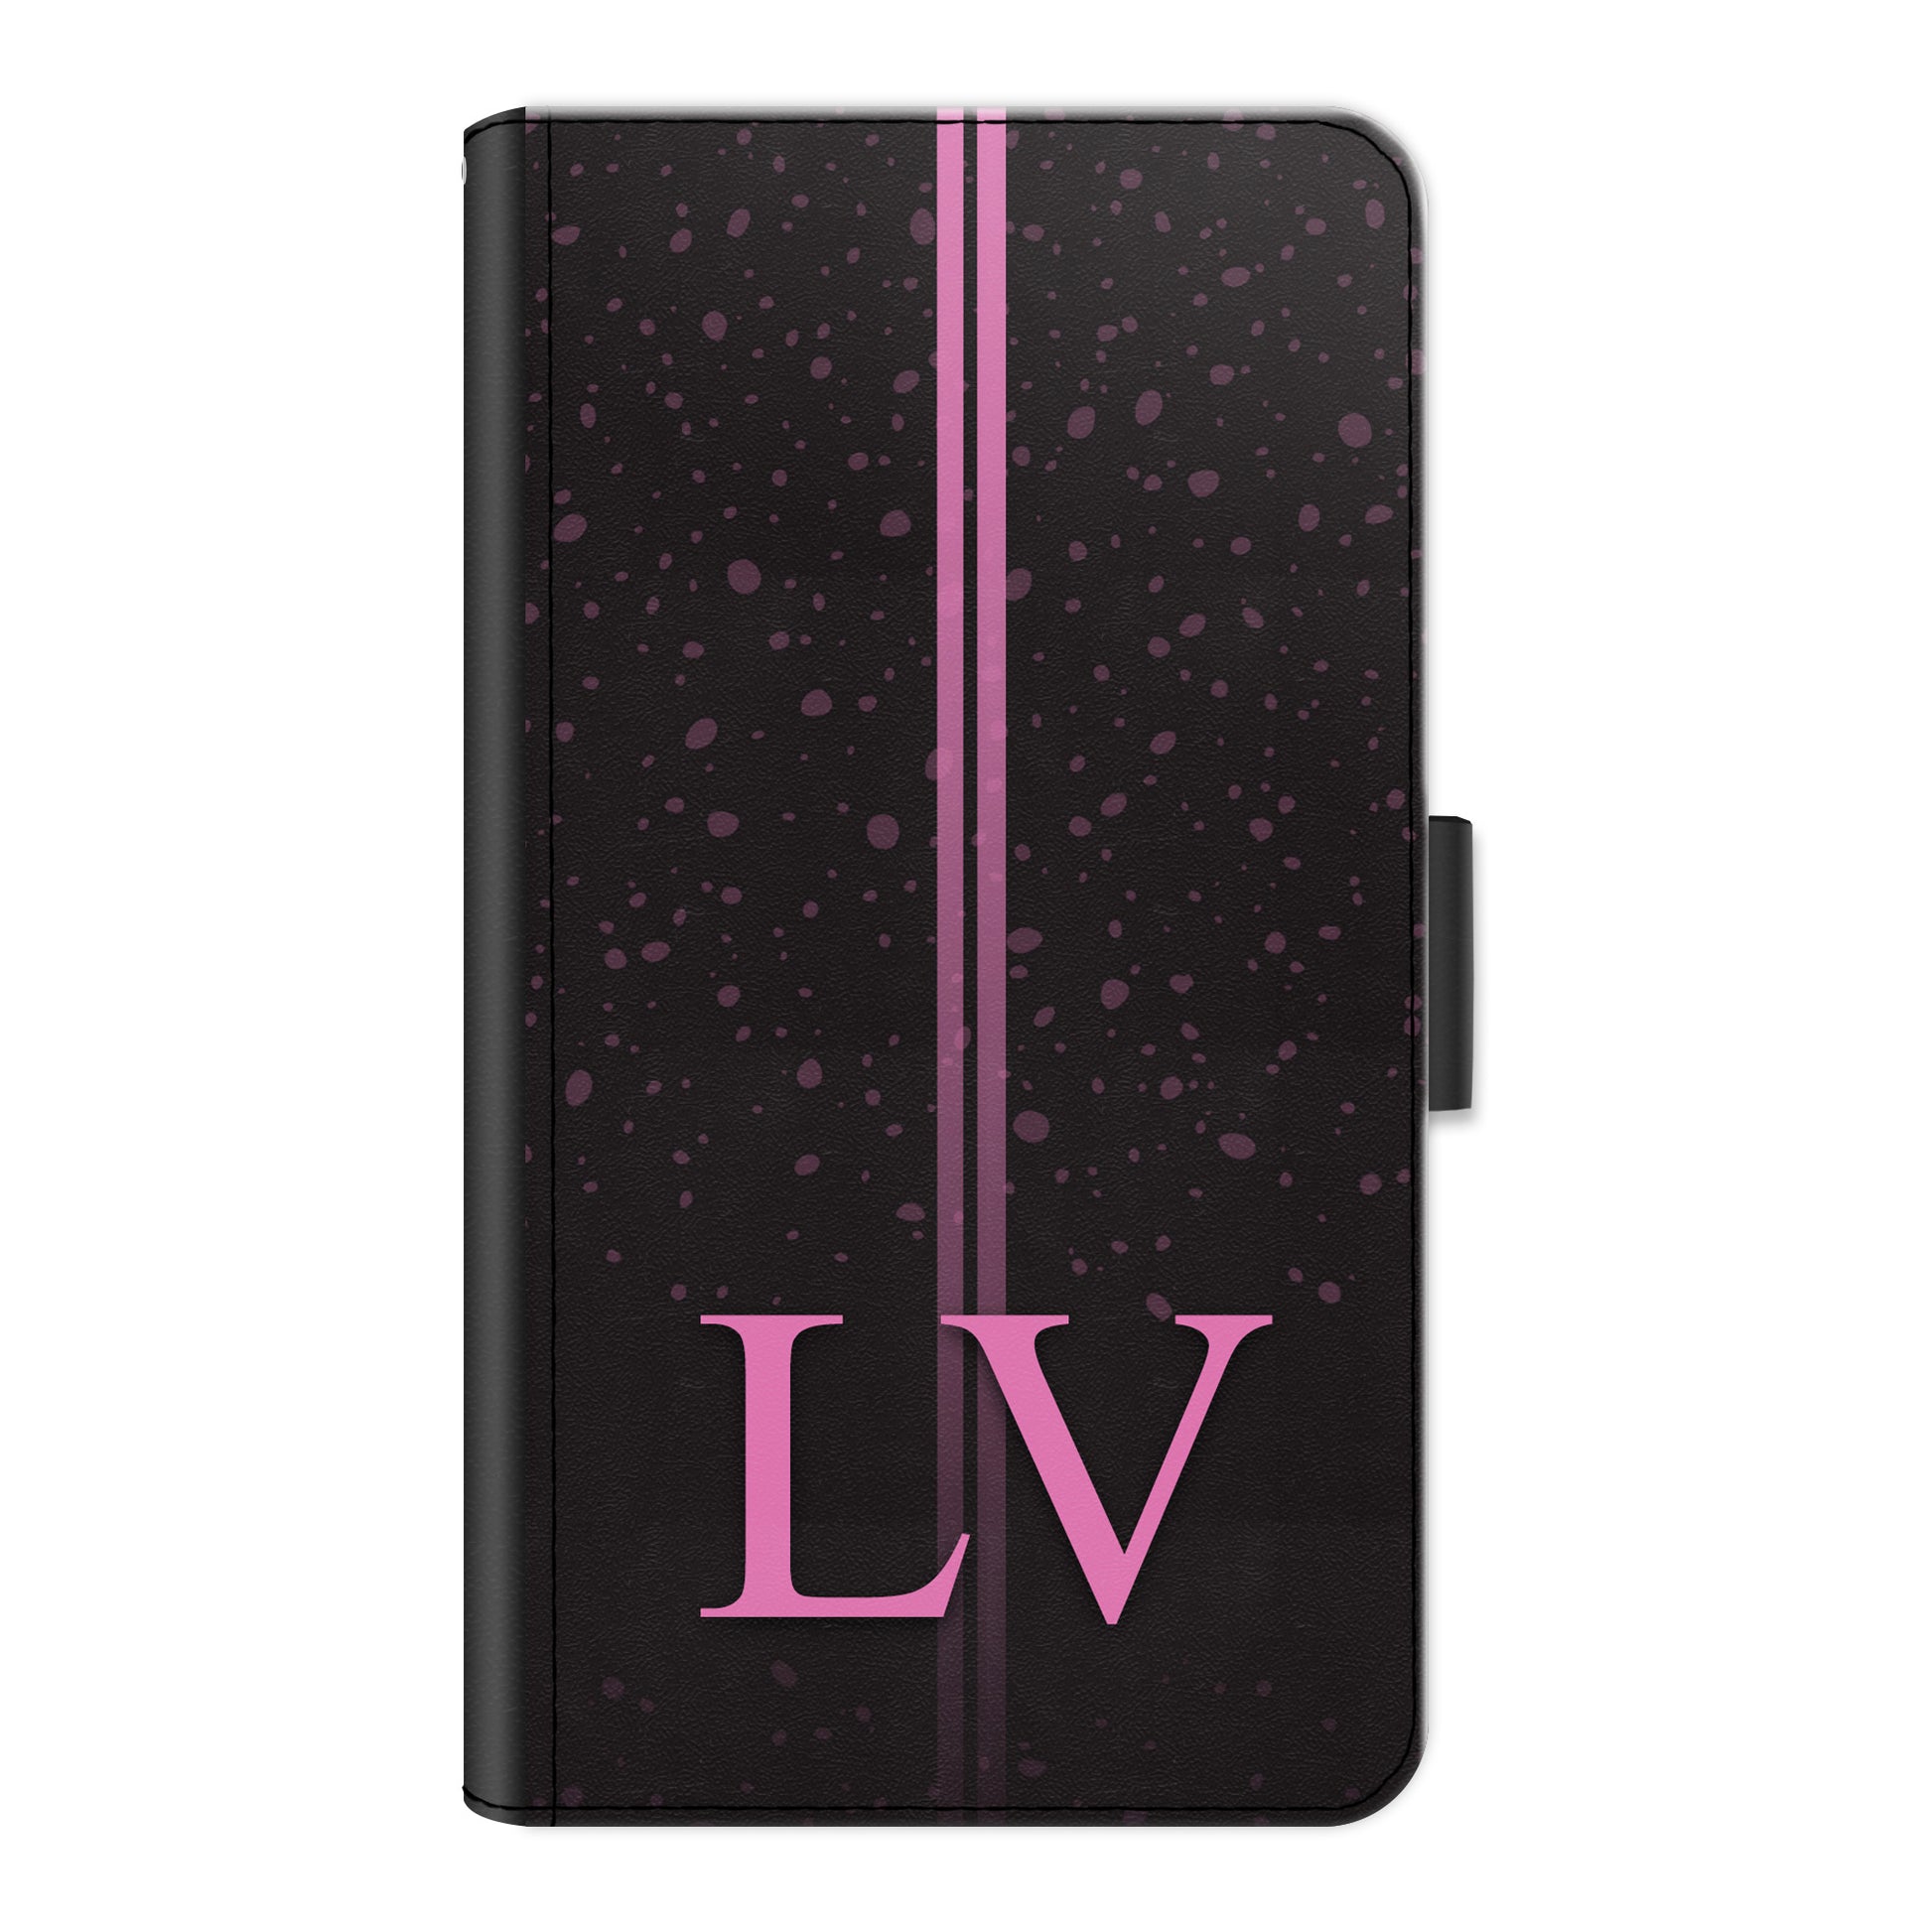 Personalised Apple iPhone Leather Wallet with Pink Initials, Pin Stripes and Droplets on Black